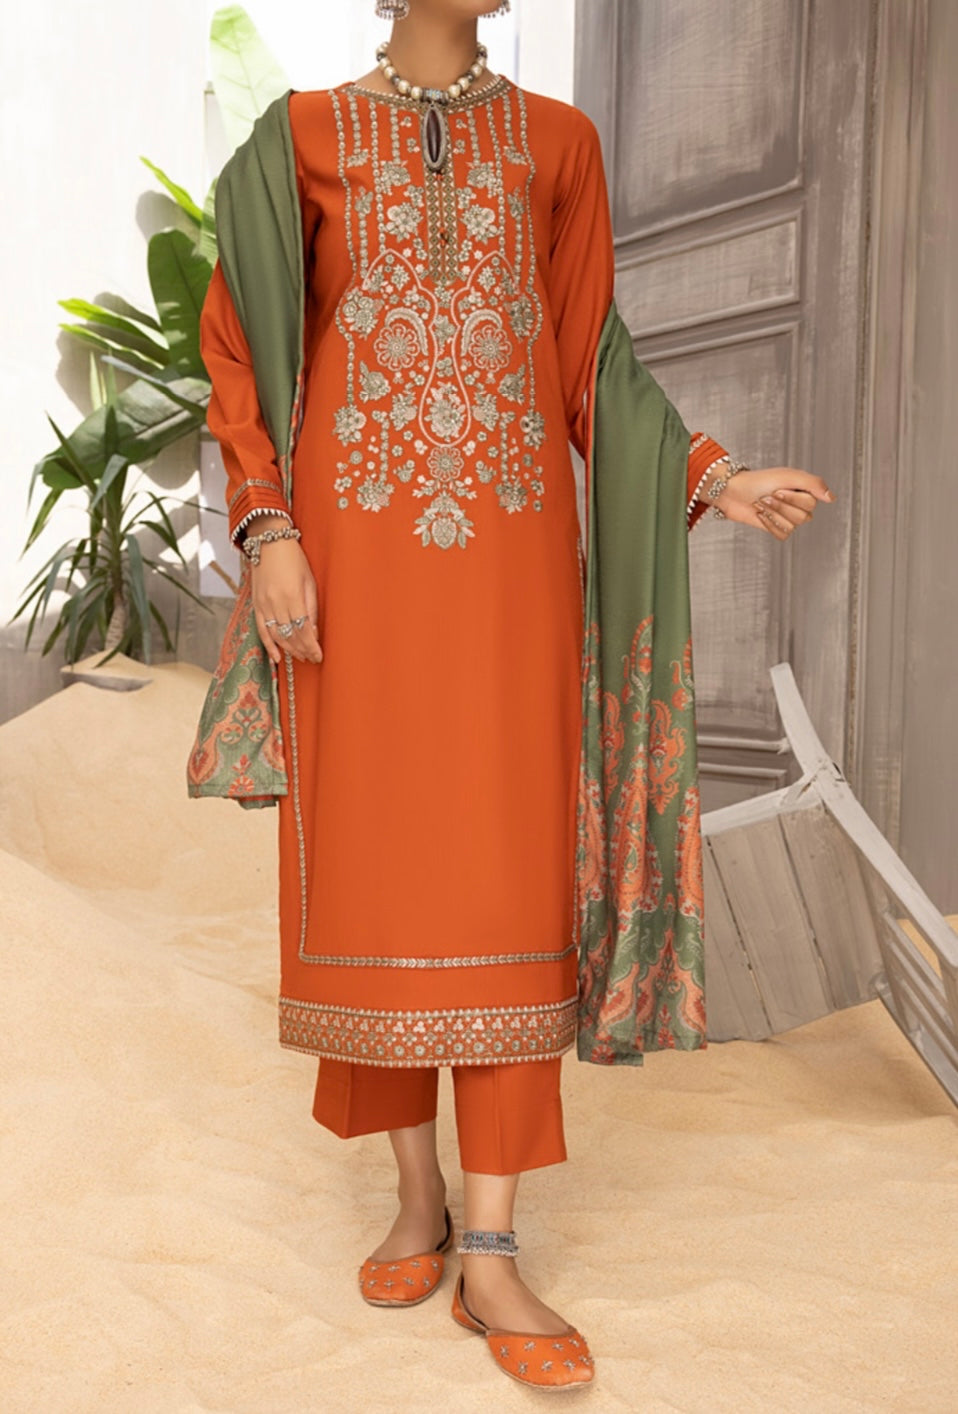  H.T Collections - Pakistani clothes